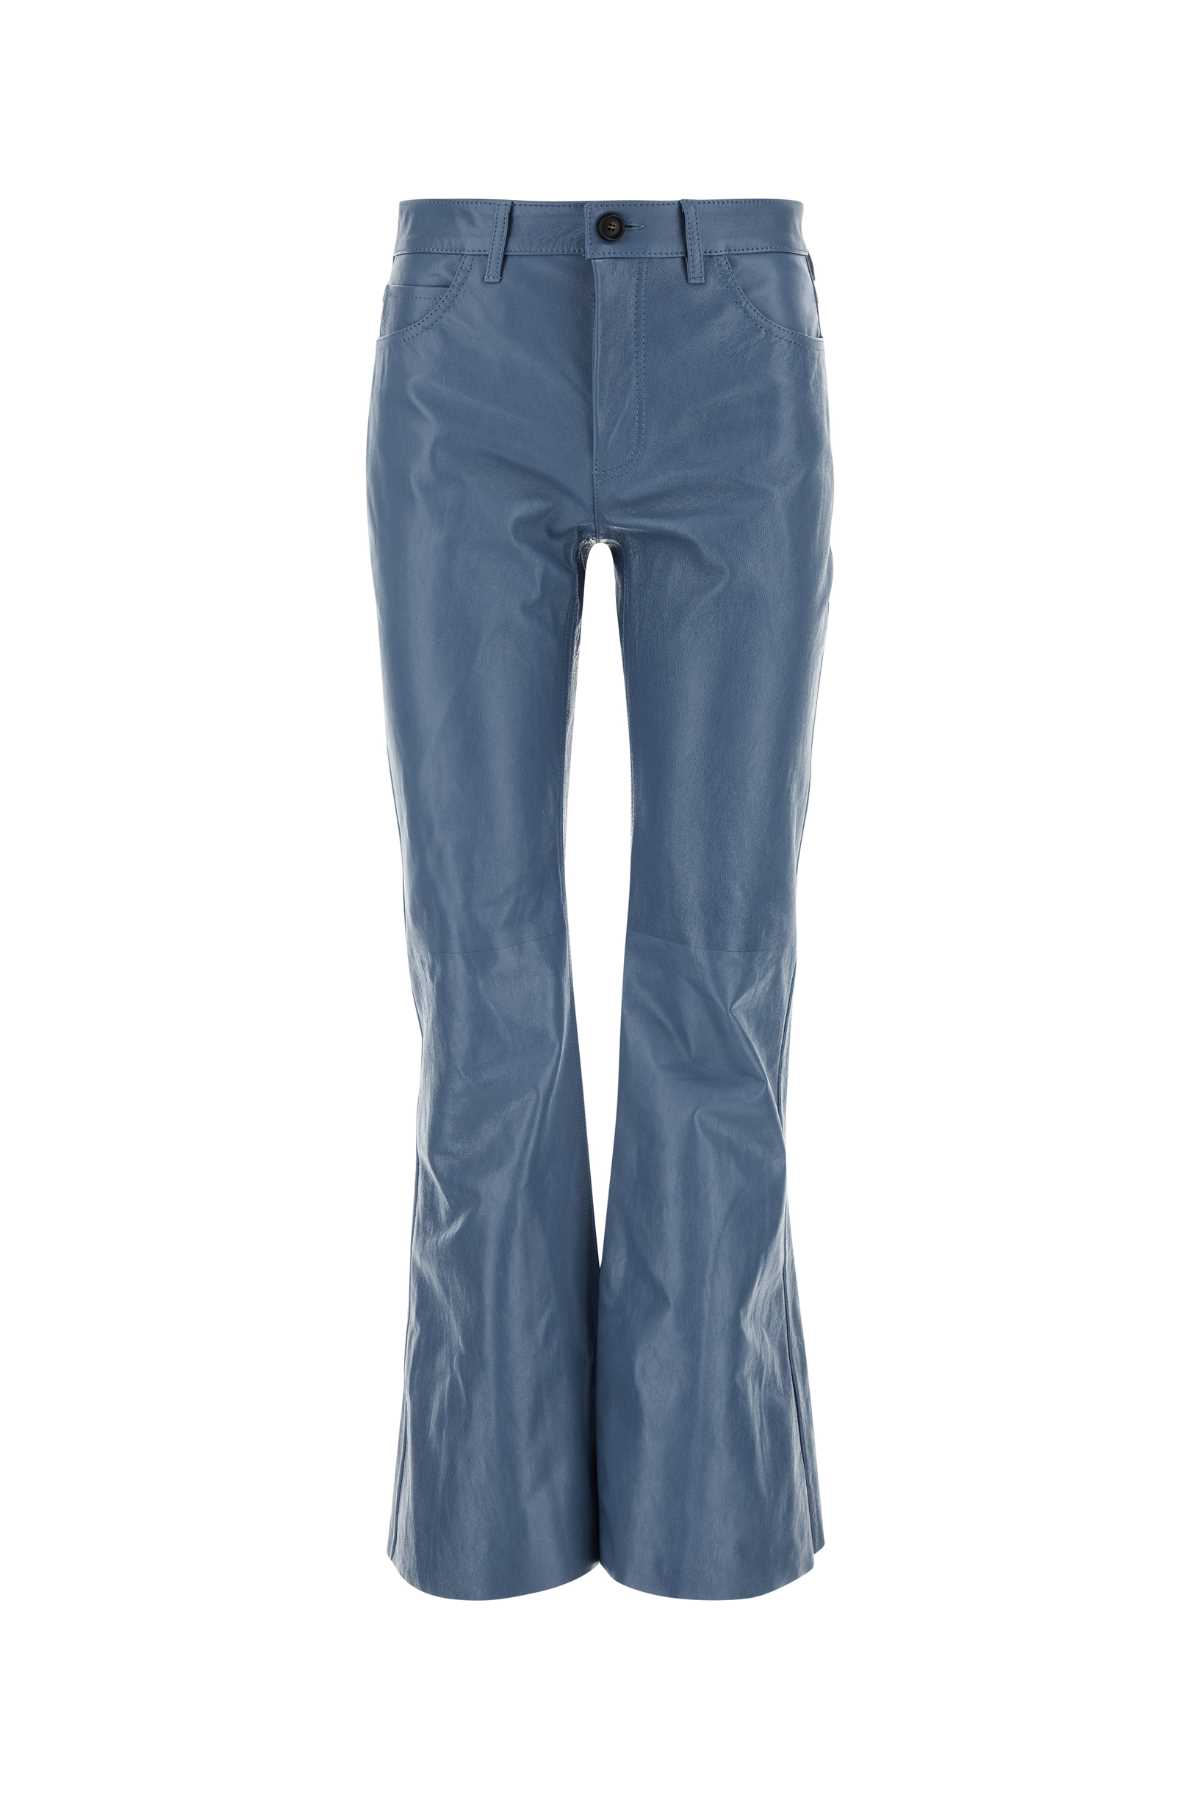 Air Force Blue Leather Pant